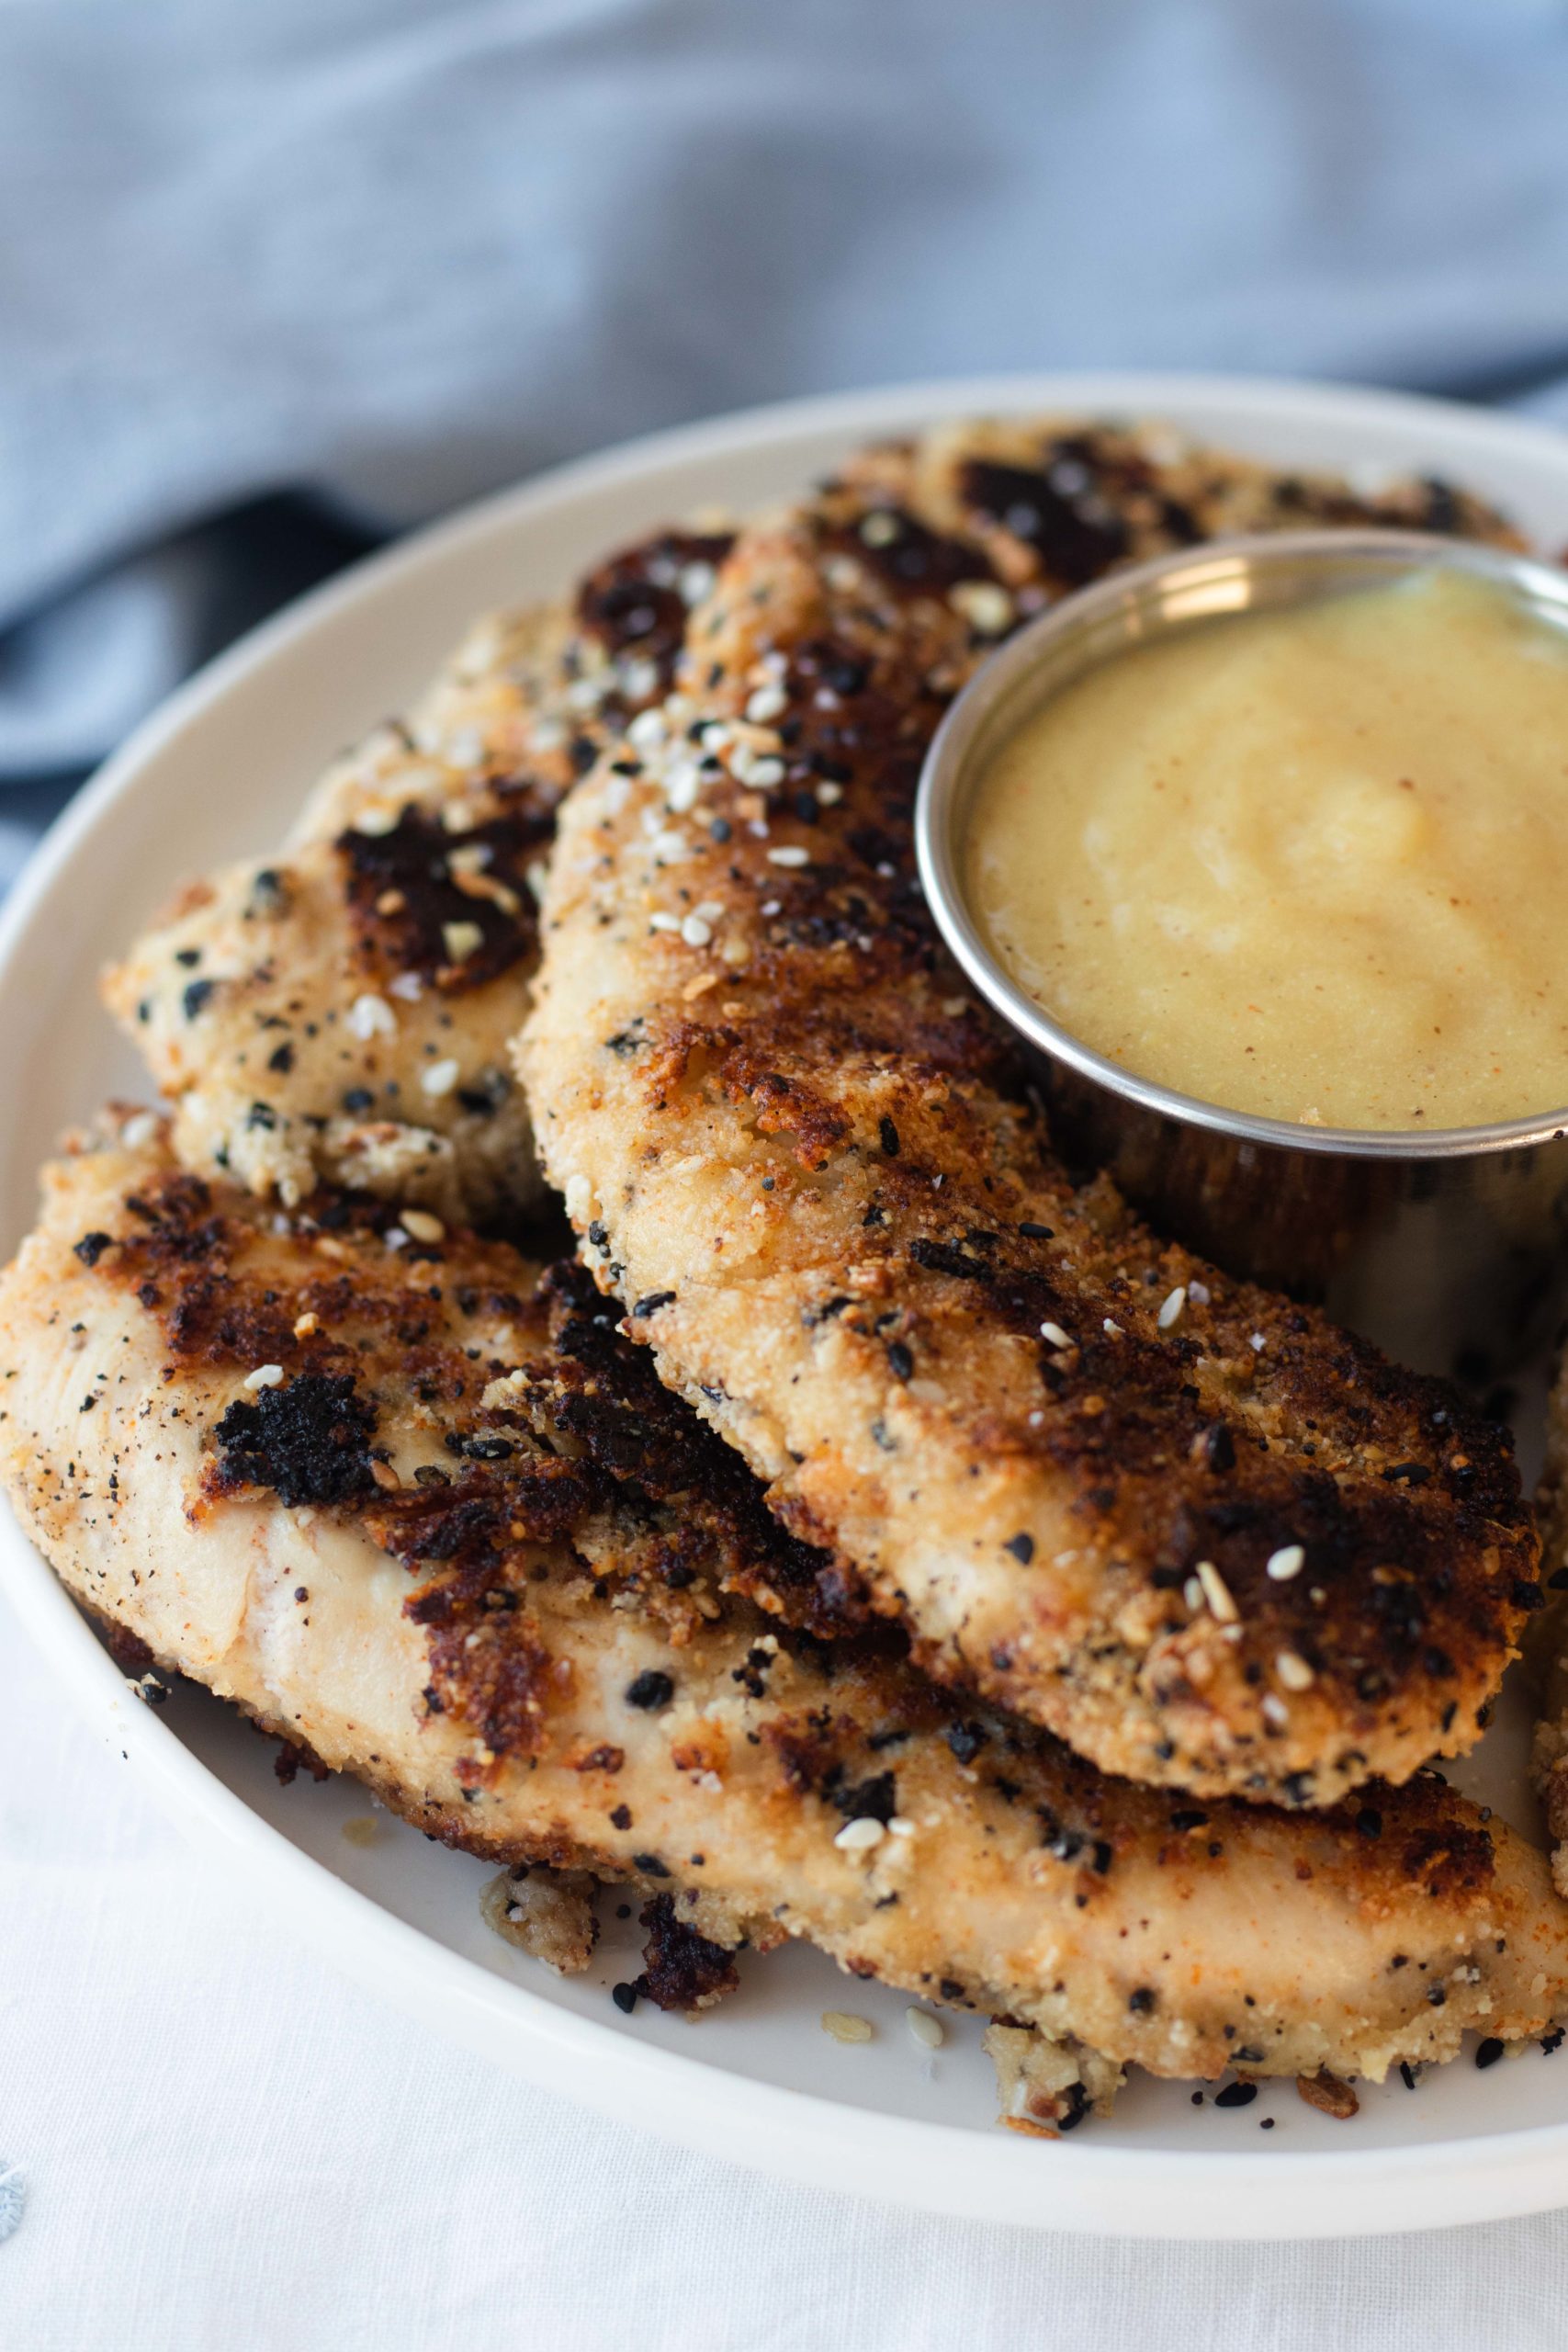 These savory keto chicken strips are breading an almond flour coating that is seasoned well with everything bagel seasoning. Great on salads and wraps!